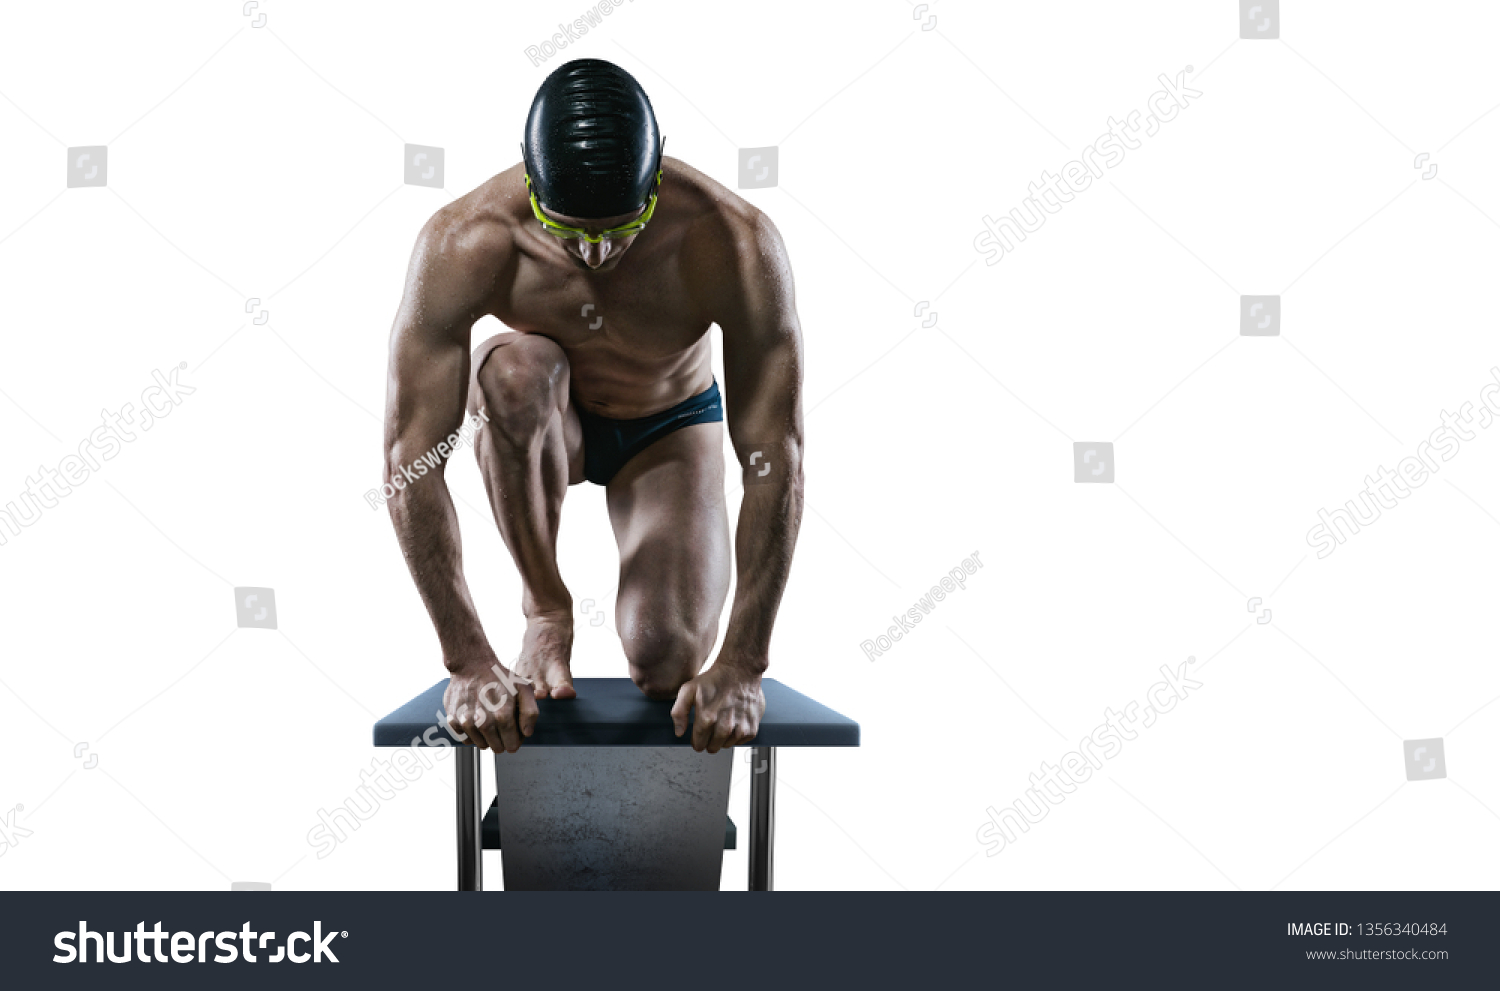 Swimming pool. Isolated muscular swimmer ready to jump.	 #1356340484